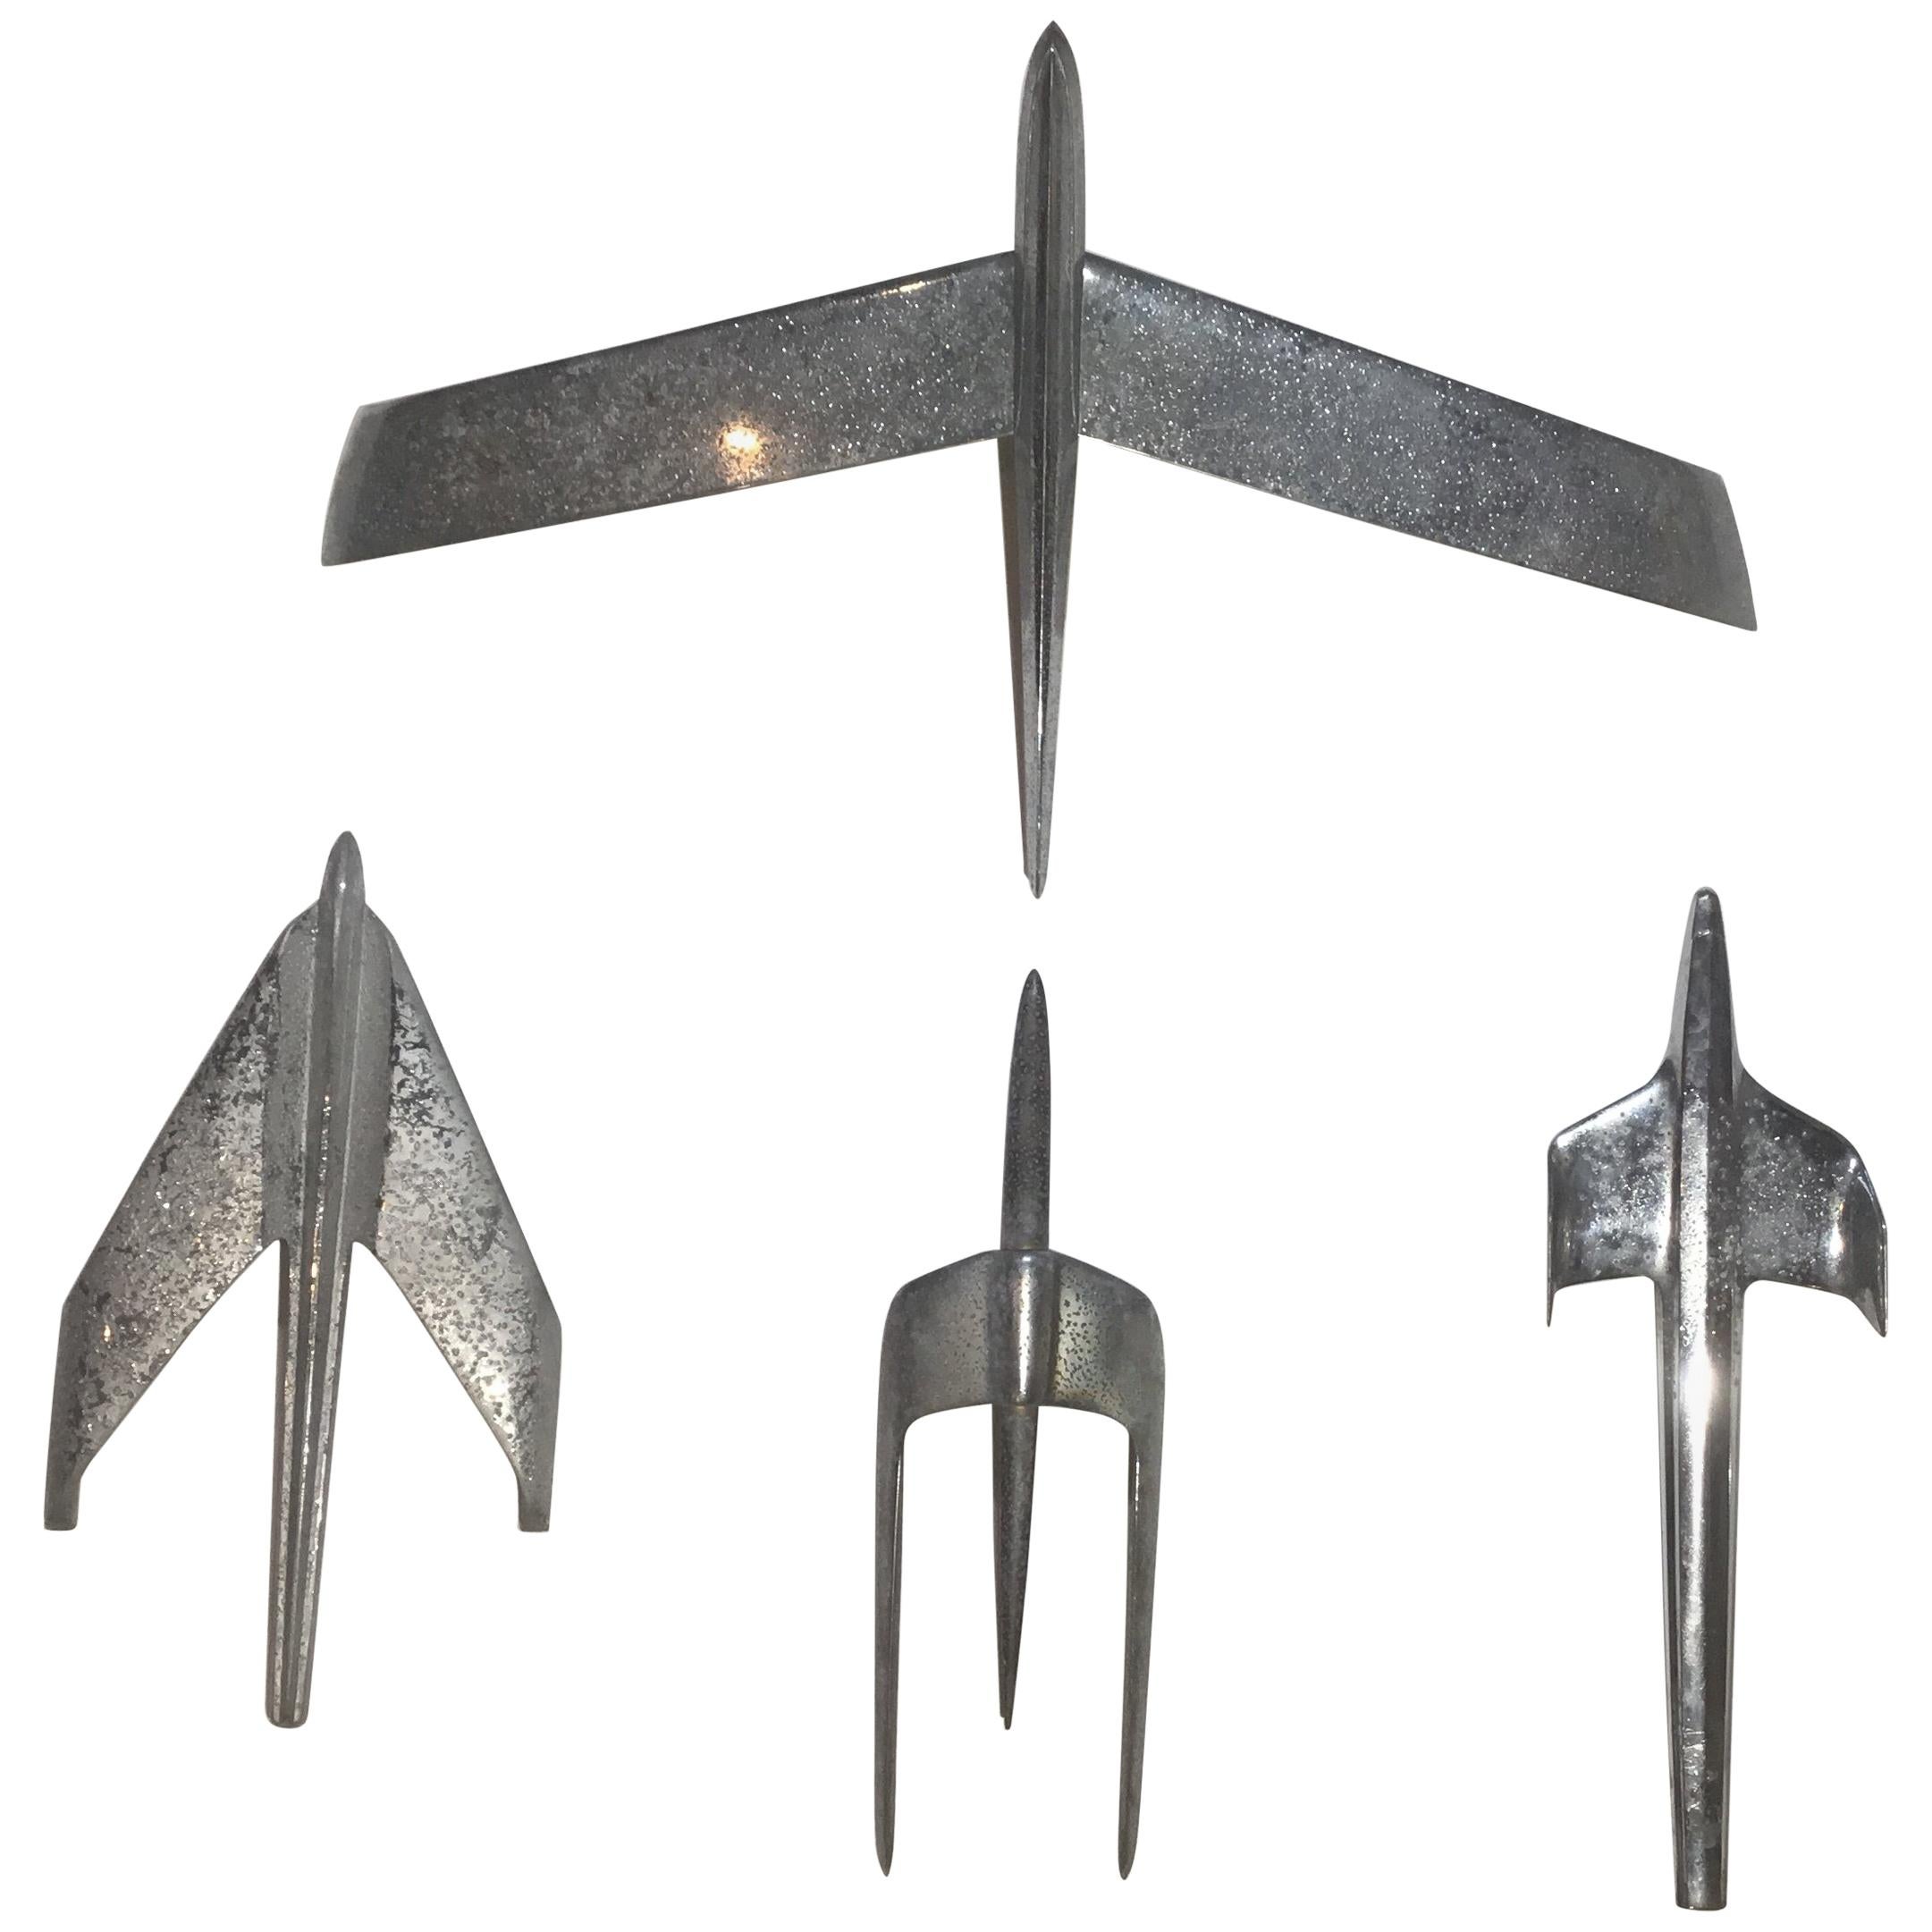 Four Vintage Airplane Wing Hood Car Ornaments Wall Hanging